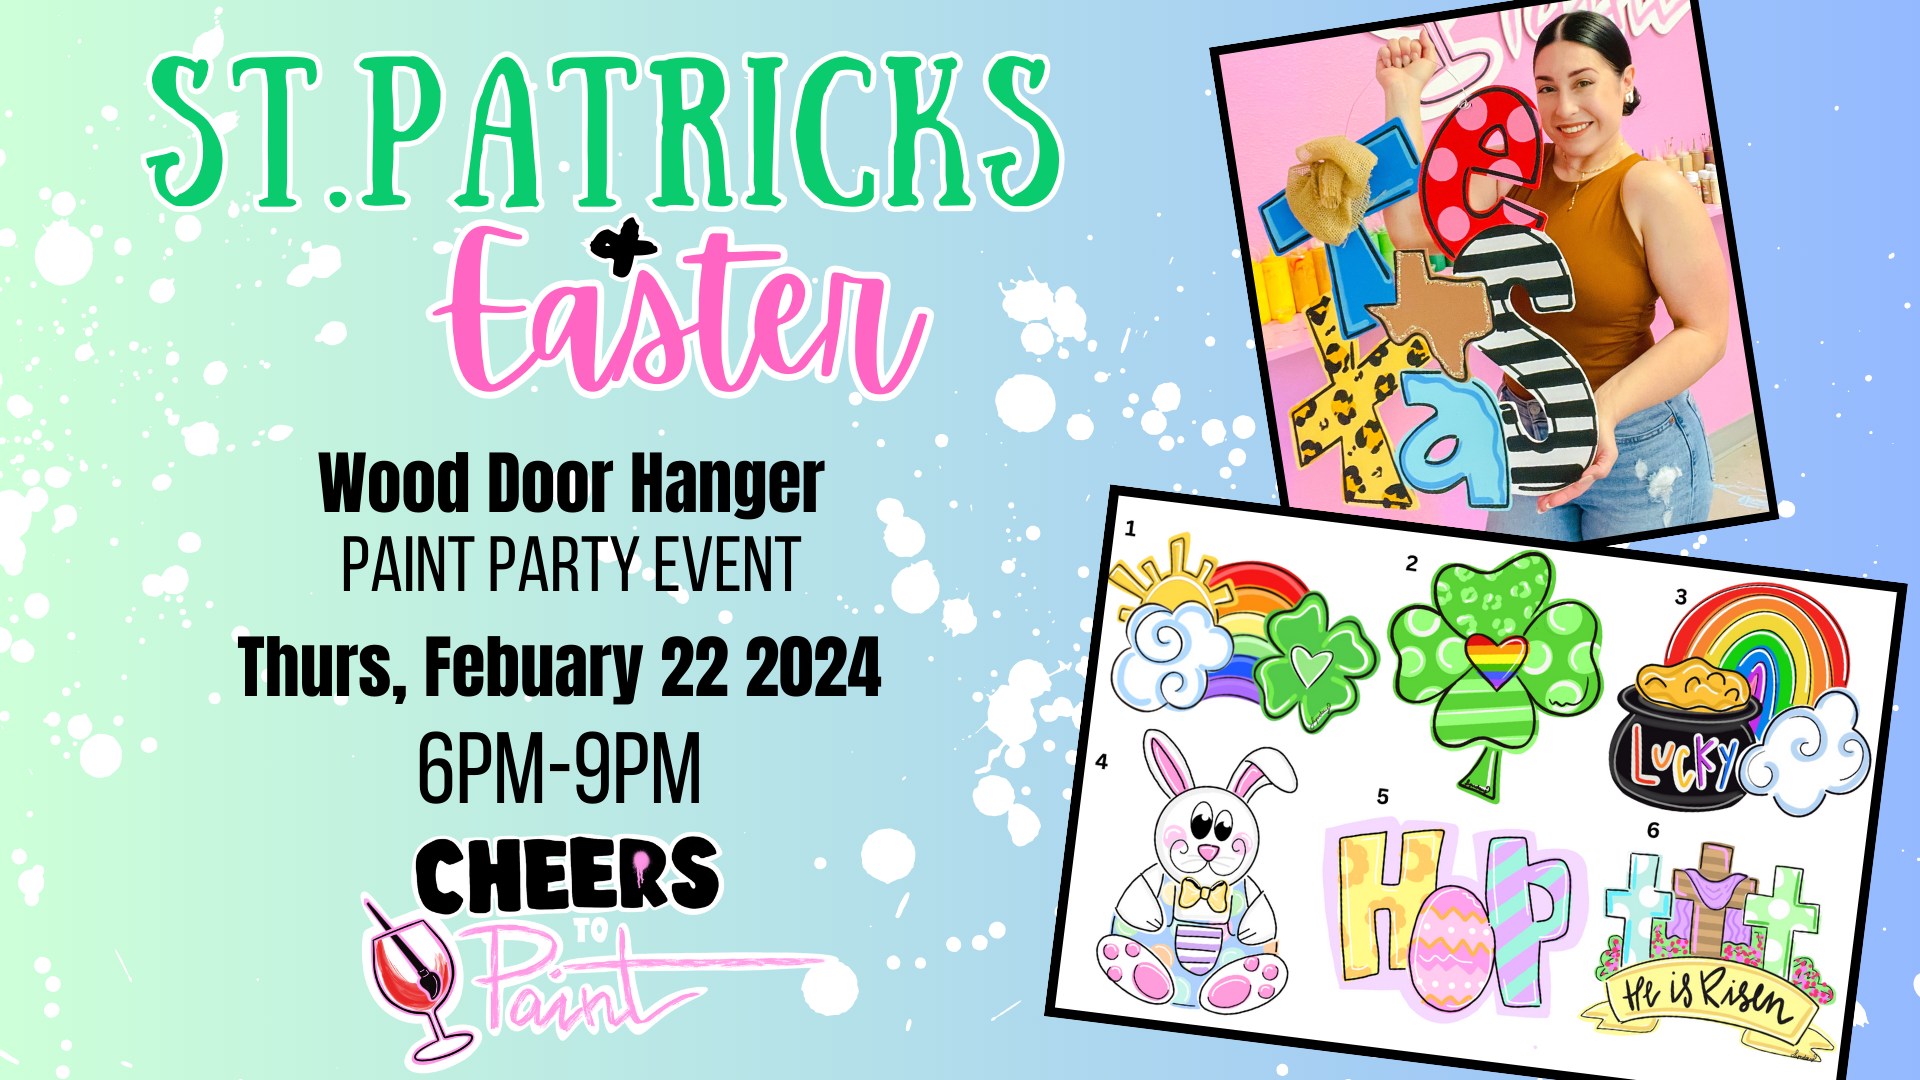 St Patricks and Easter Painting Class on February 22, 2024